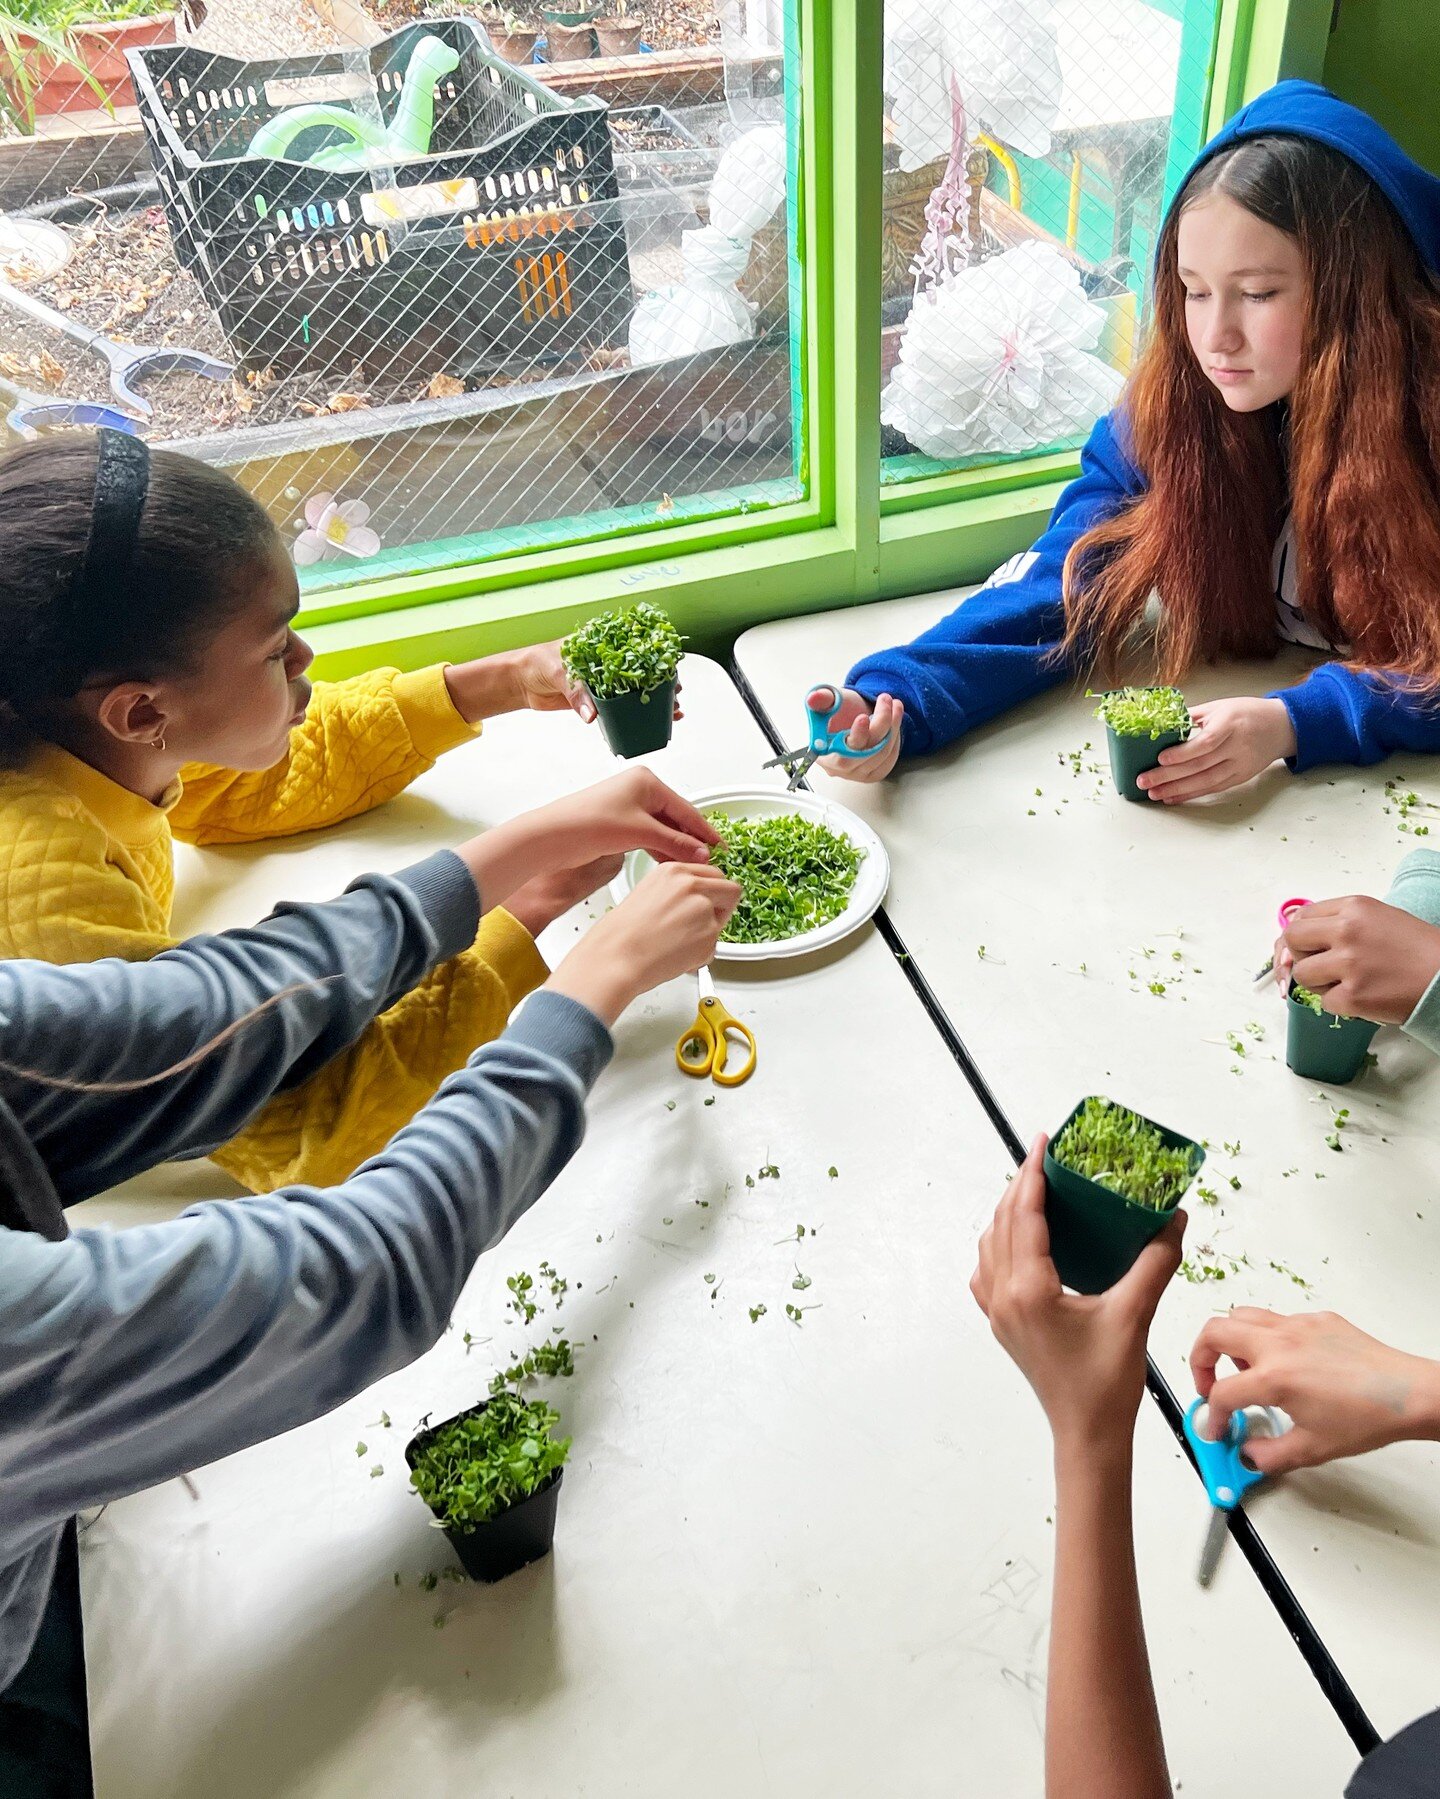 Harvest day without waiting for harvest season? Count us in. Rain, snow, we handle it all - one of the benefits of your farm being in your classroom. All we need is a place to plug in our grow lights. 

#bostonyouthfarmproject #byfp #microgreens #cla